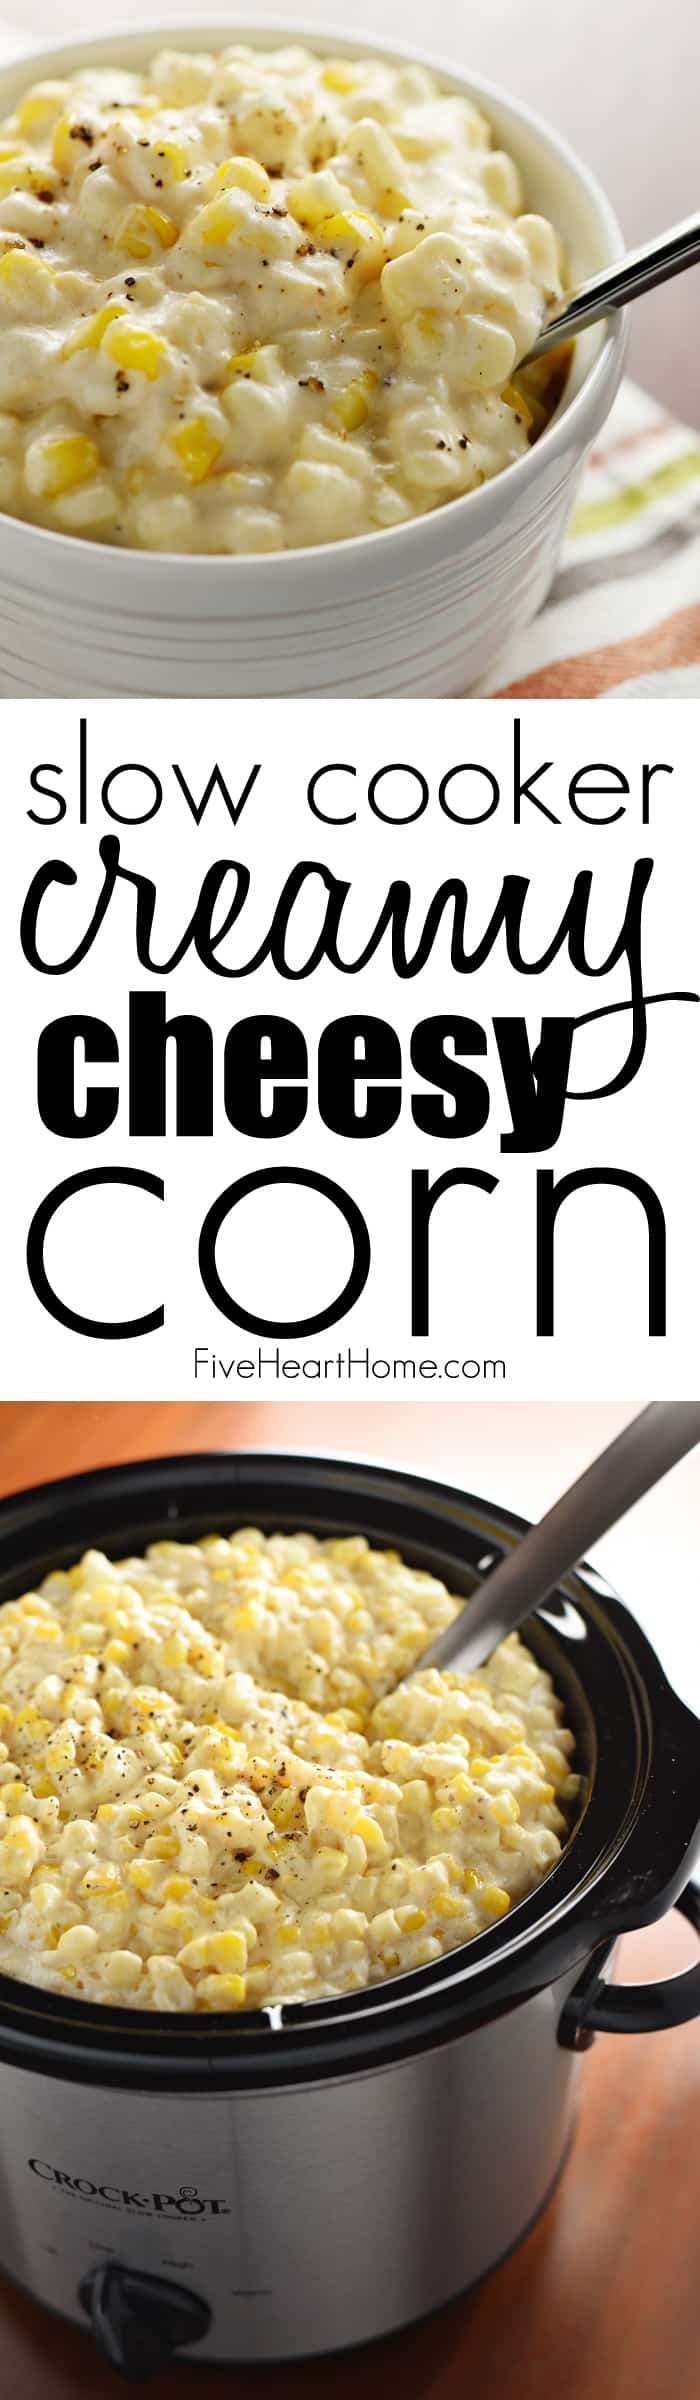 Slow Cooker Creamy Cheesy Corn ~ a rich, comforting side dish that's the perfect addition to any holiday menu...because not only is this recipe delicious, but it also frees up the stove and oven! | FiveHeartHome.com via @fivehearthome